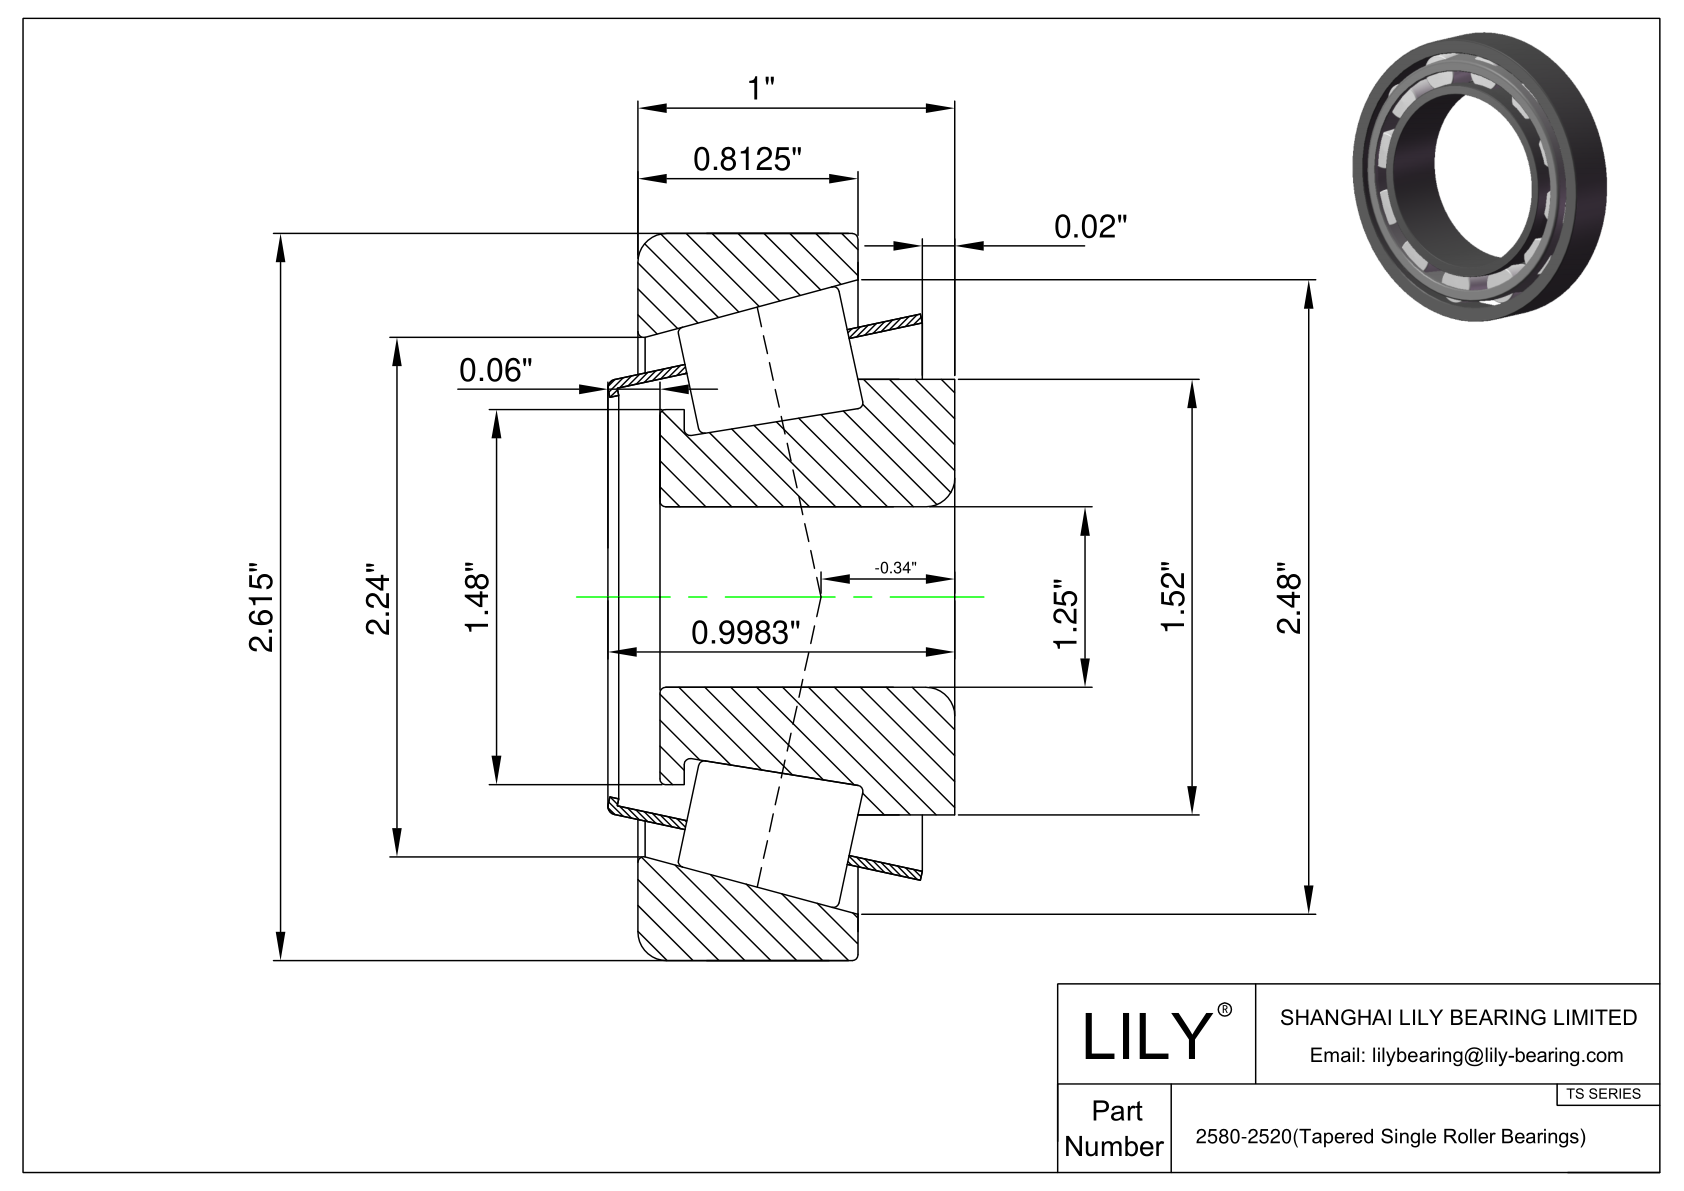 2580-2520 TS (Tapered Single Roller Bearings) (Imperial) cad drawing